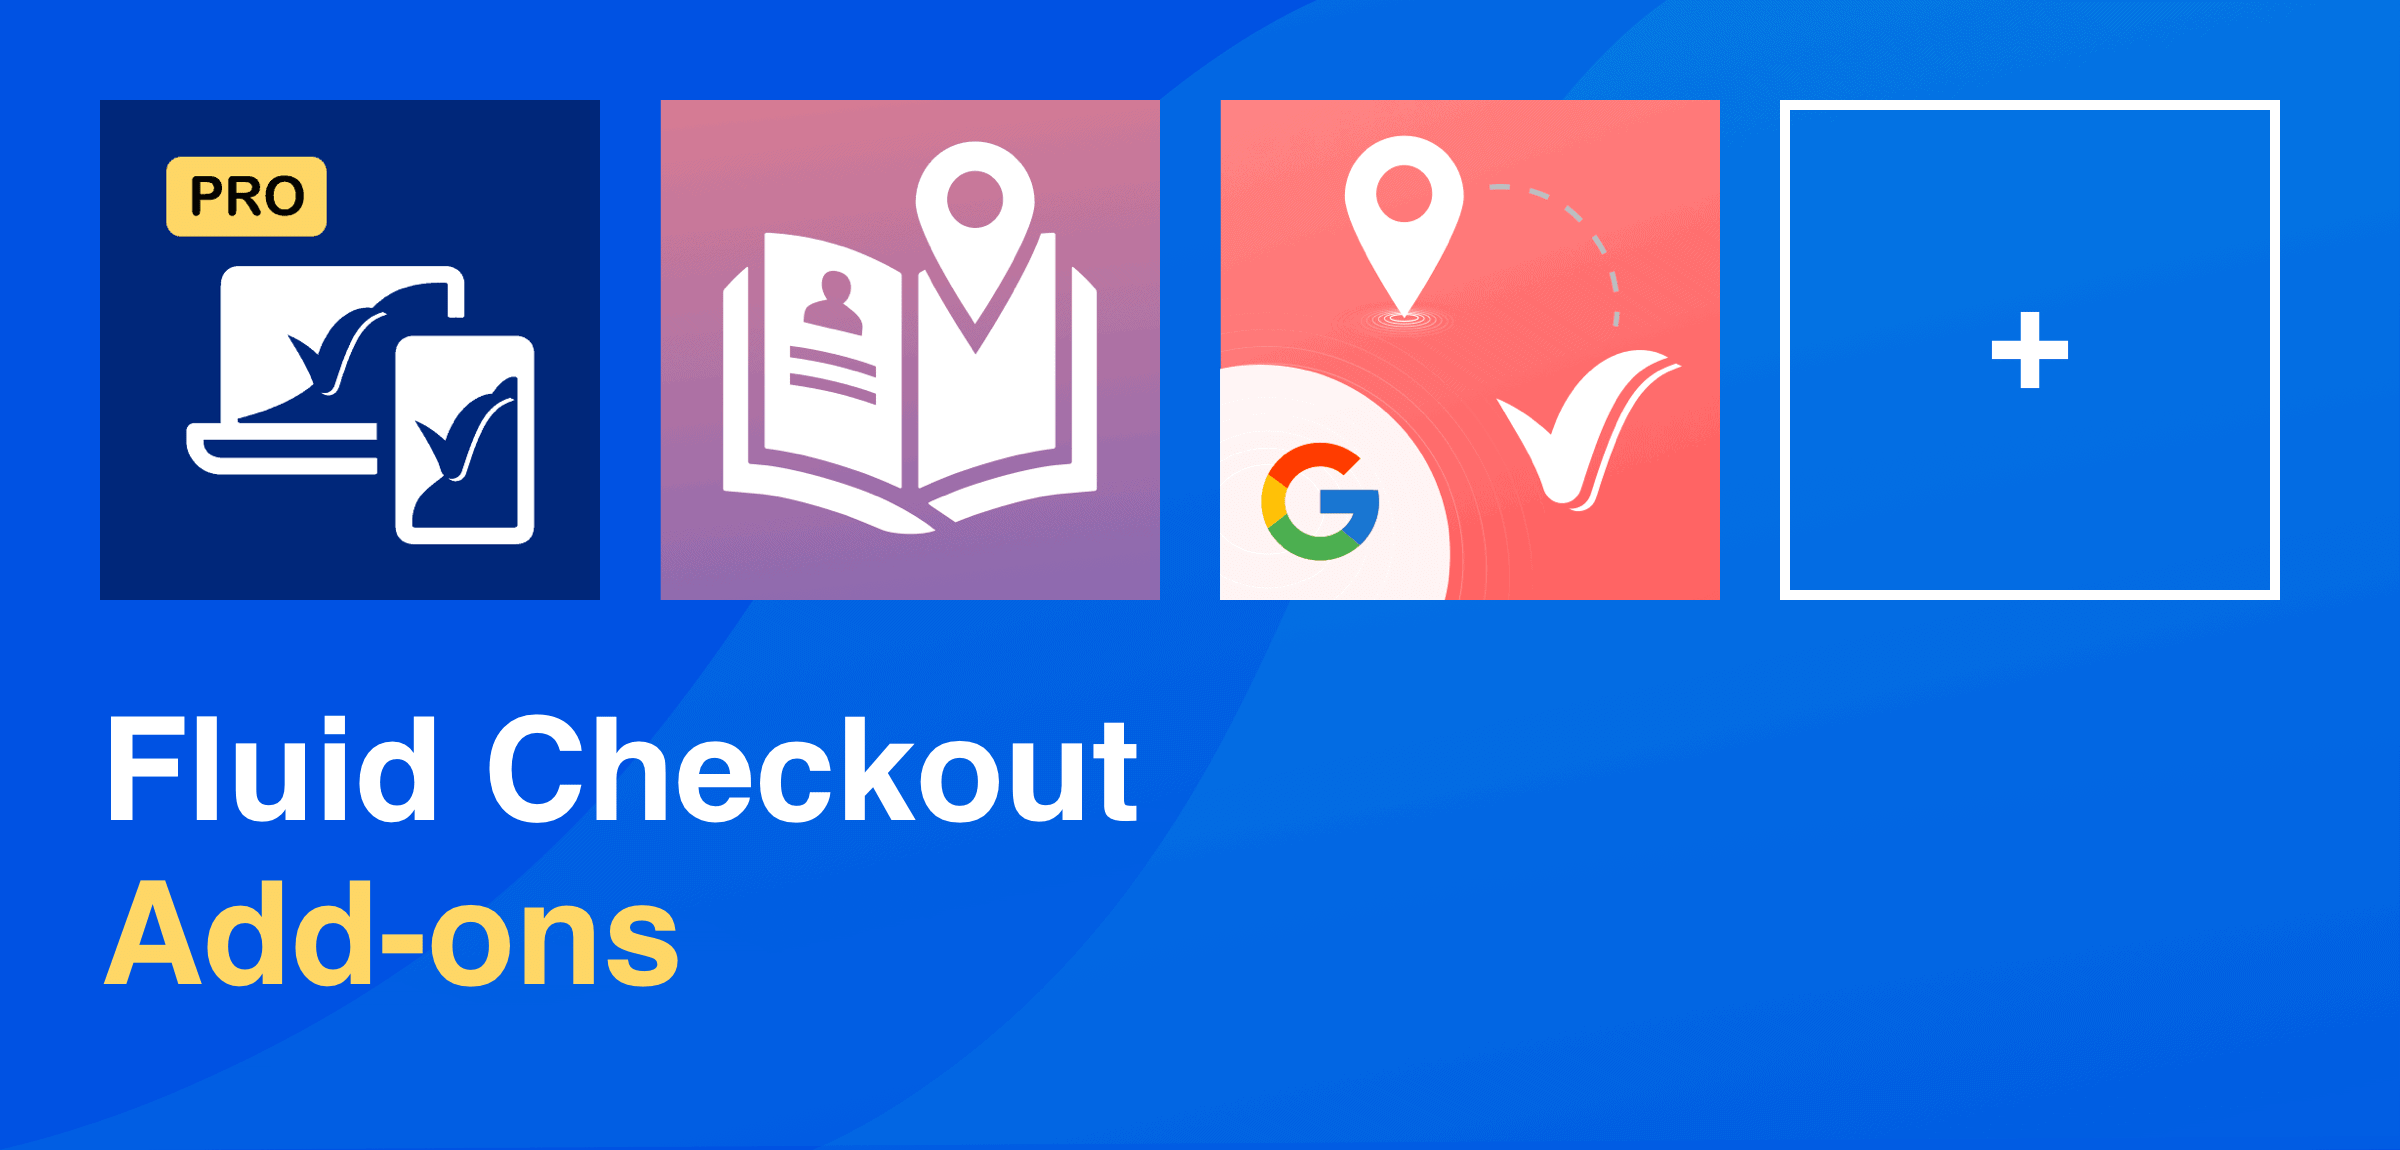 Fluid Checkout Add-ons — Save big on the complete bundle plans